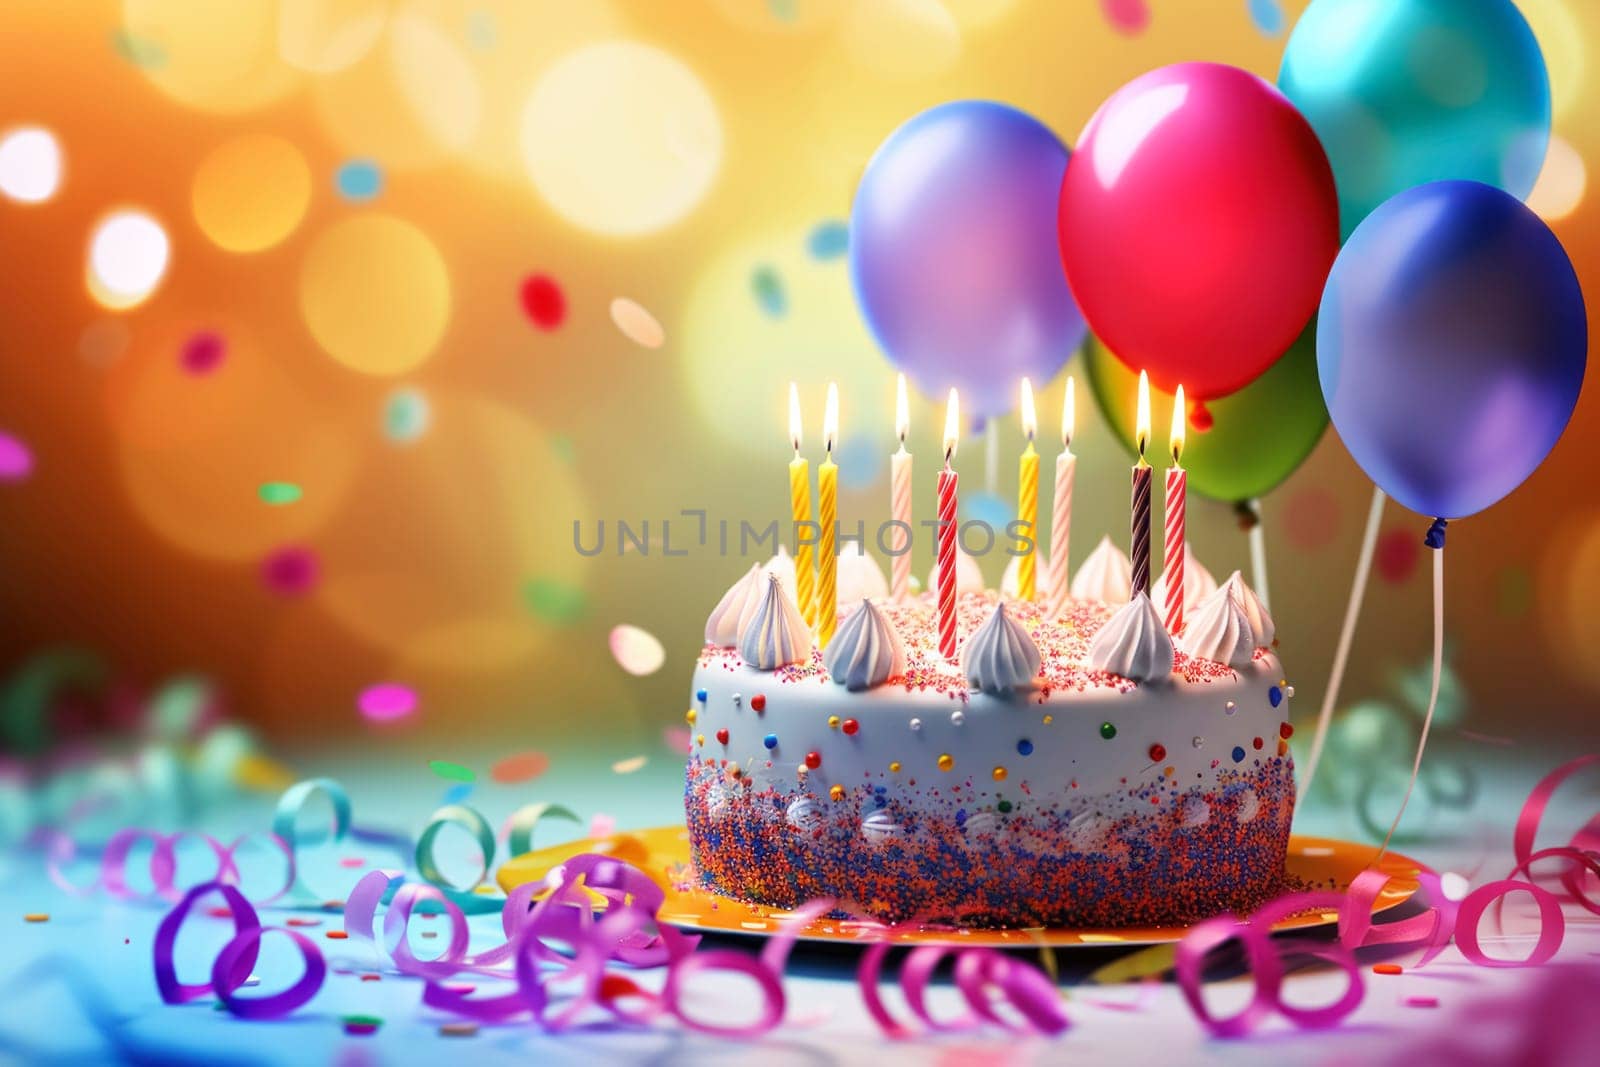 Birthday background with birthday cake with candles and colorful balloon by andreyz